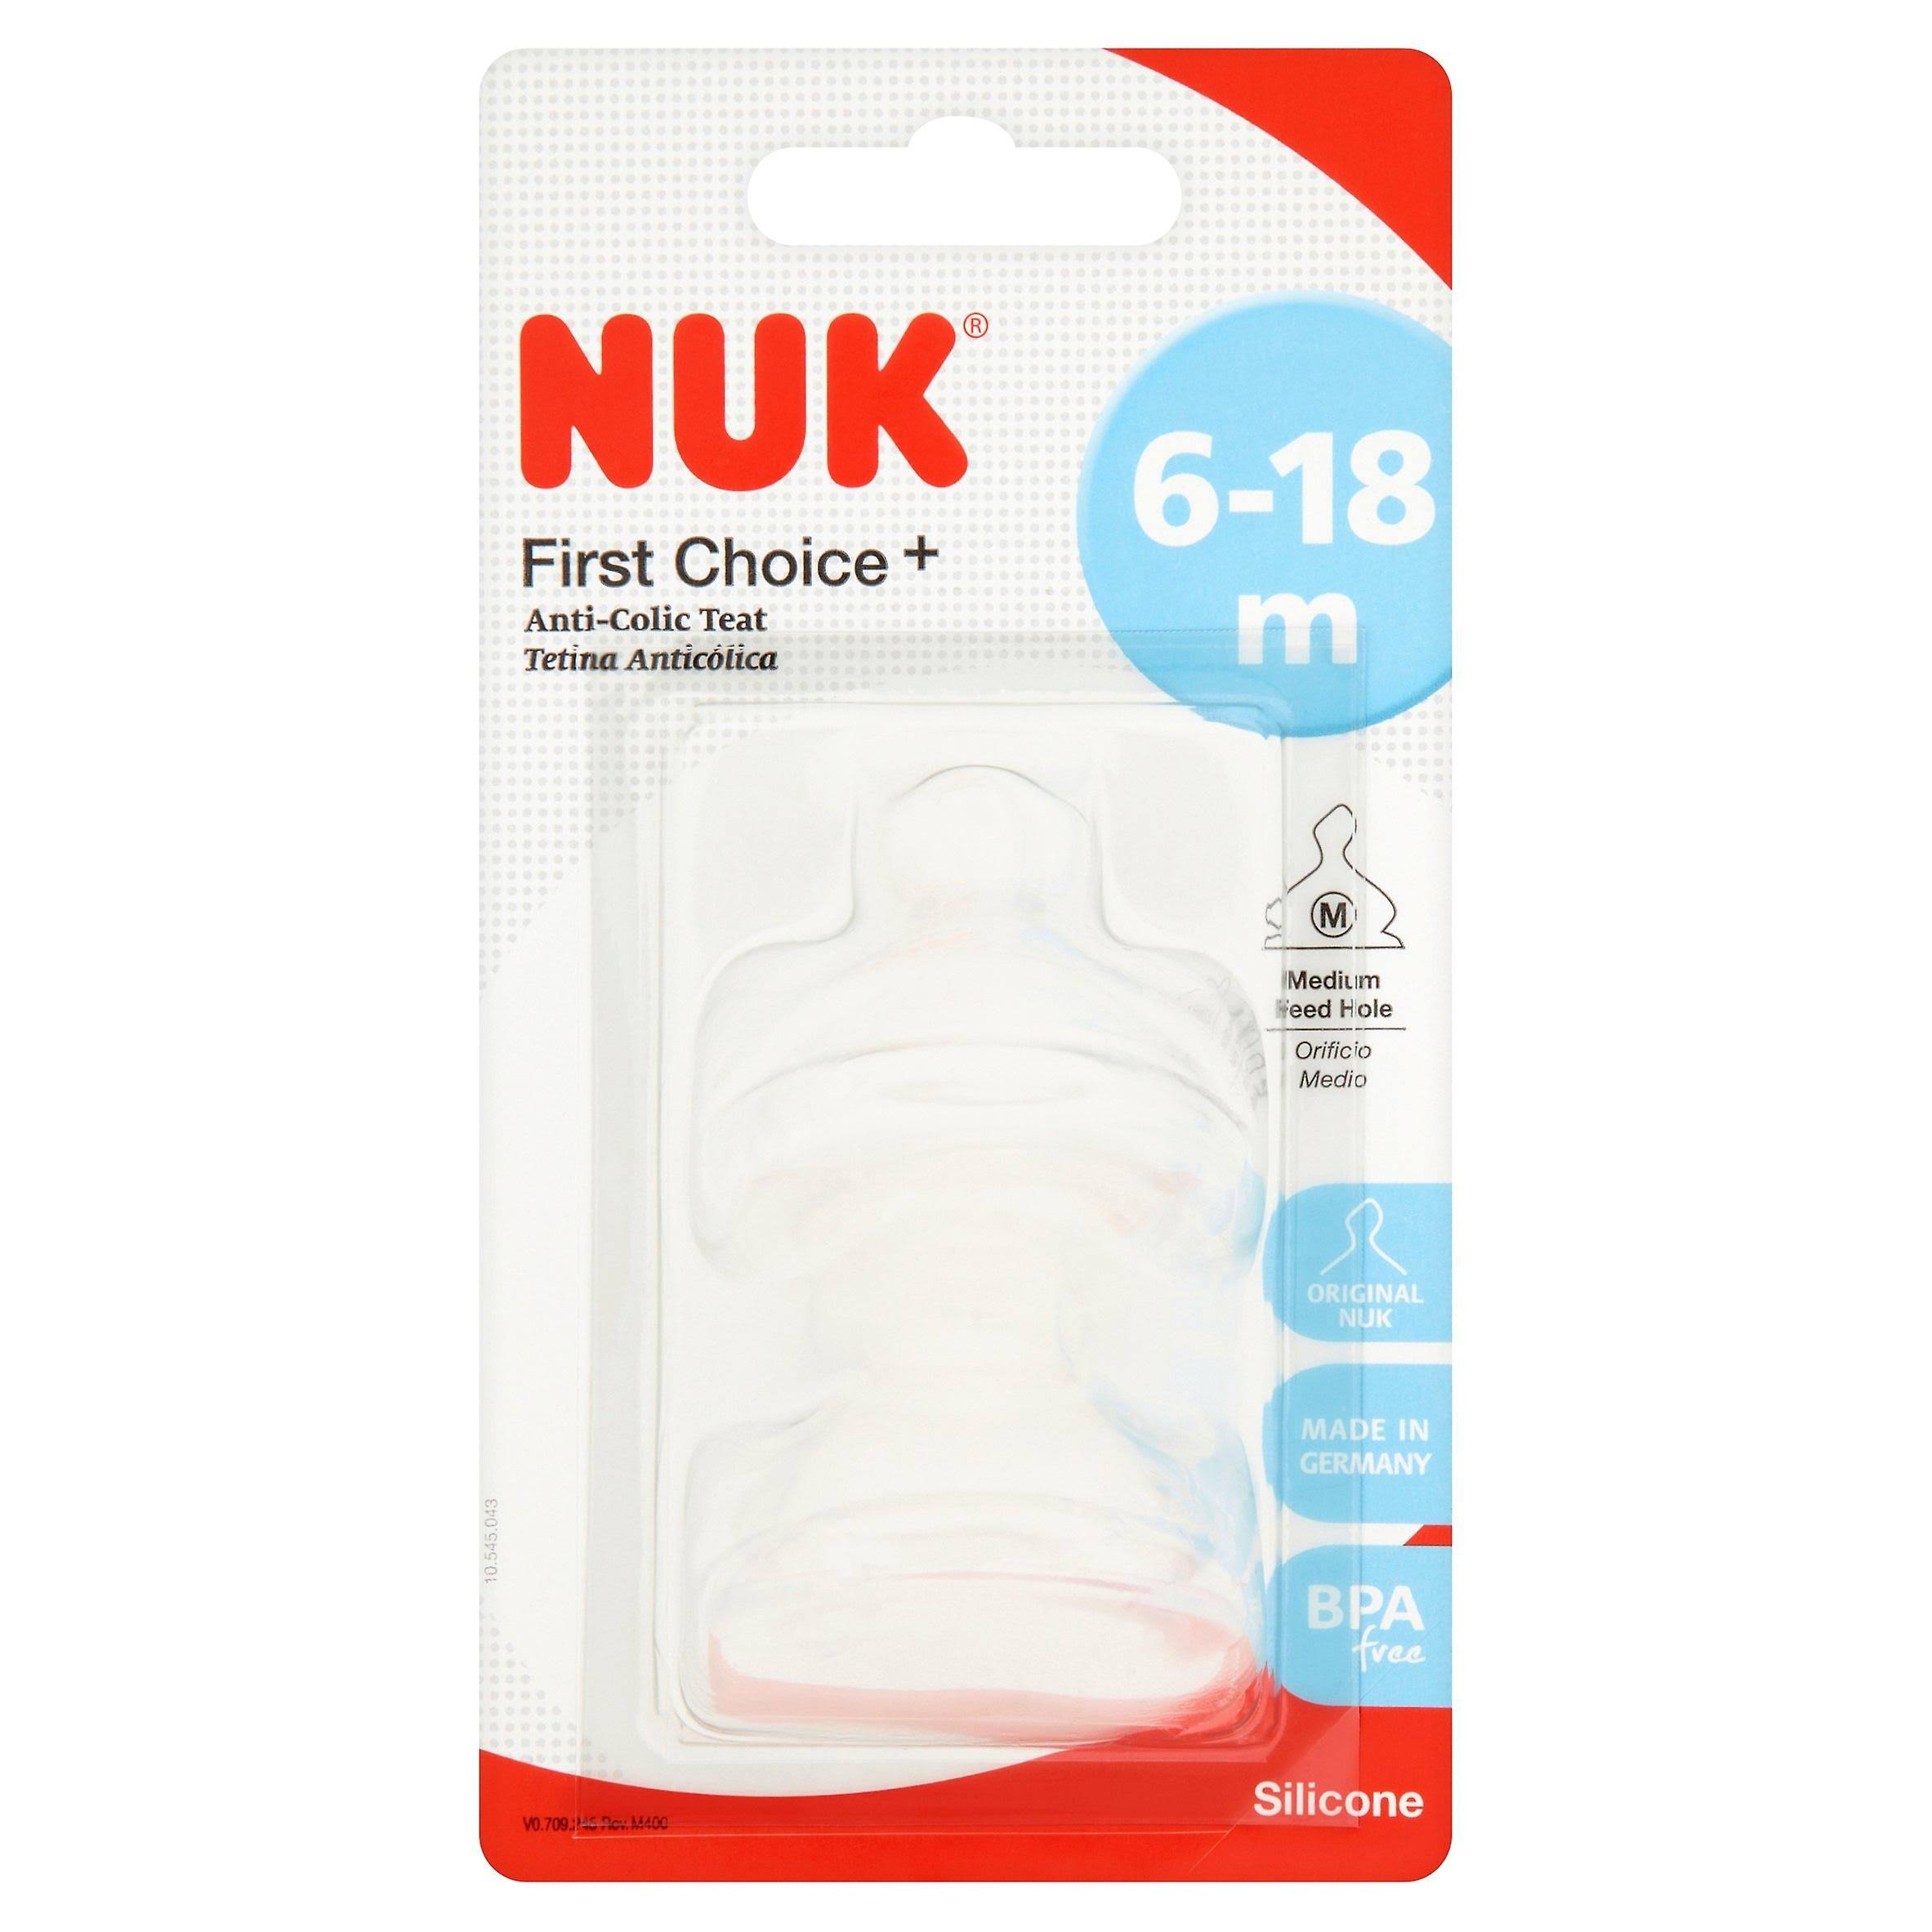 NUK First Choice + Silicone Teats - 2pcs, 6-18 Months